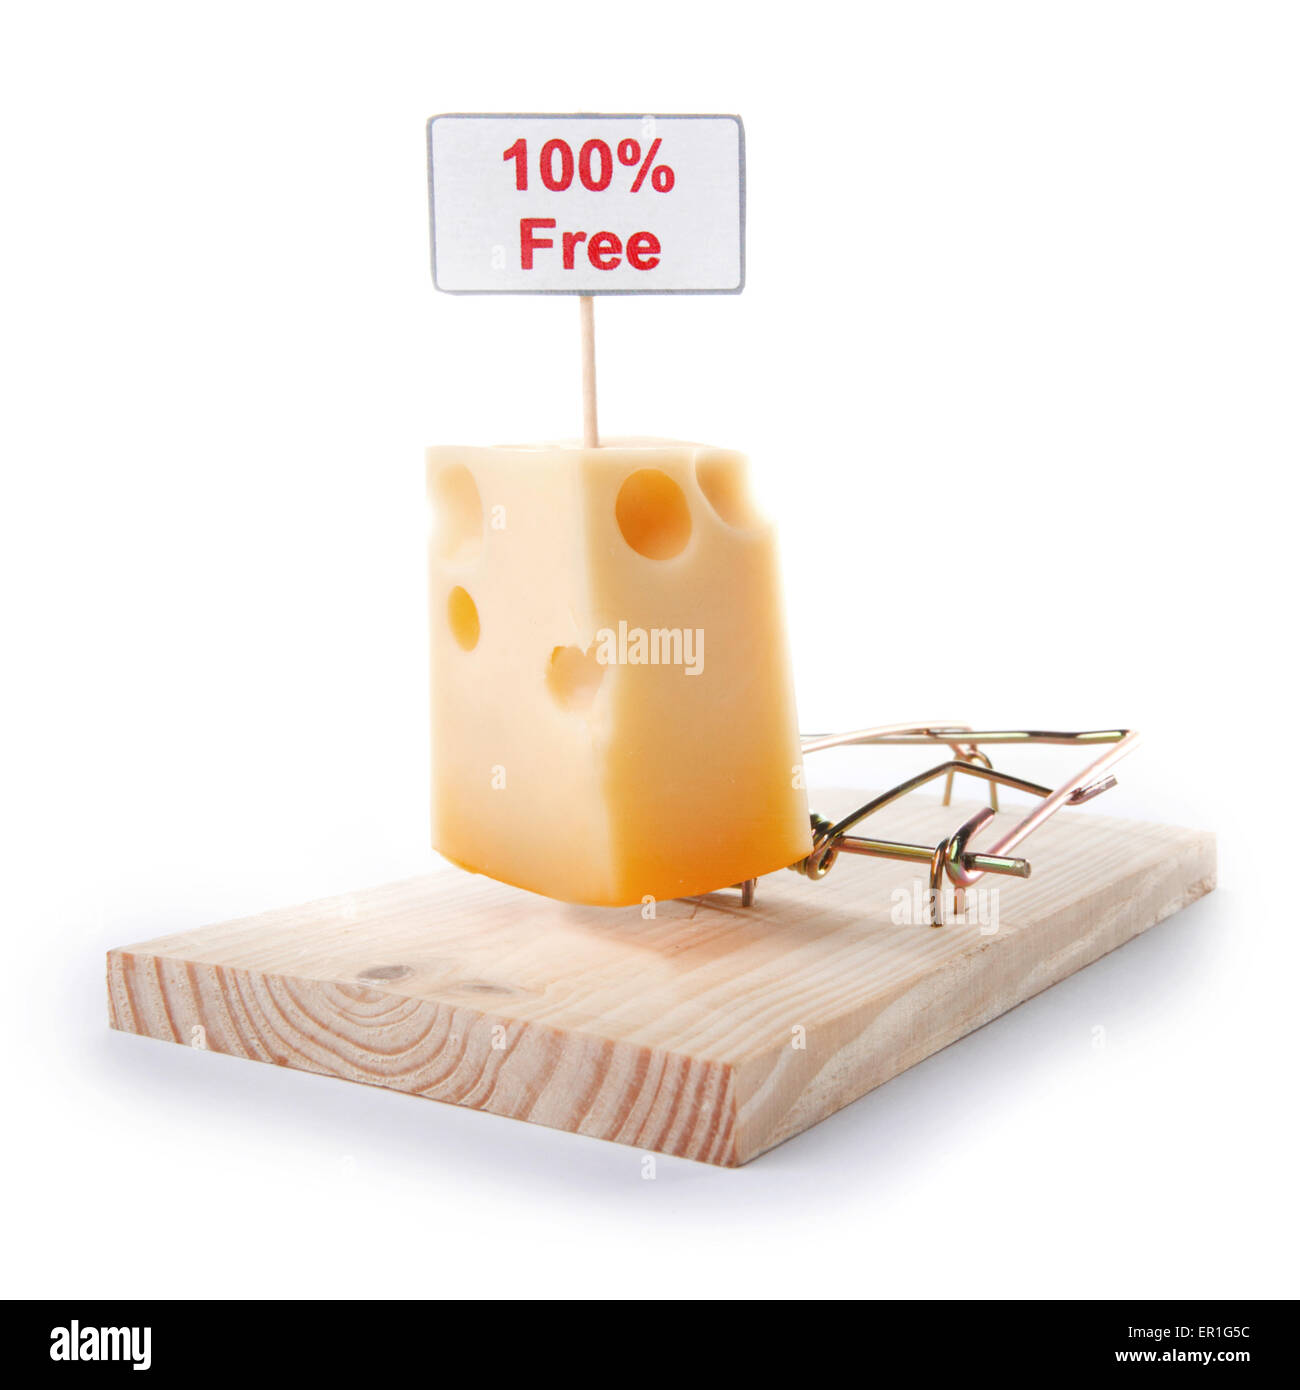 https://c8.alamy.com/comp/ER1G5C/mousetrap-with-free-cheese-sign-isolated-on-white-entrapment-concept-ER1G5C.jpg